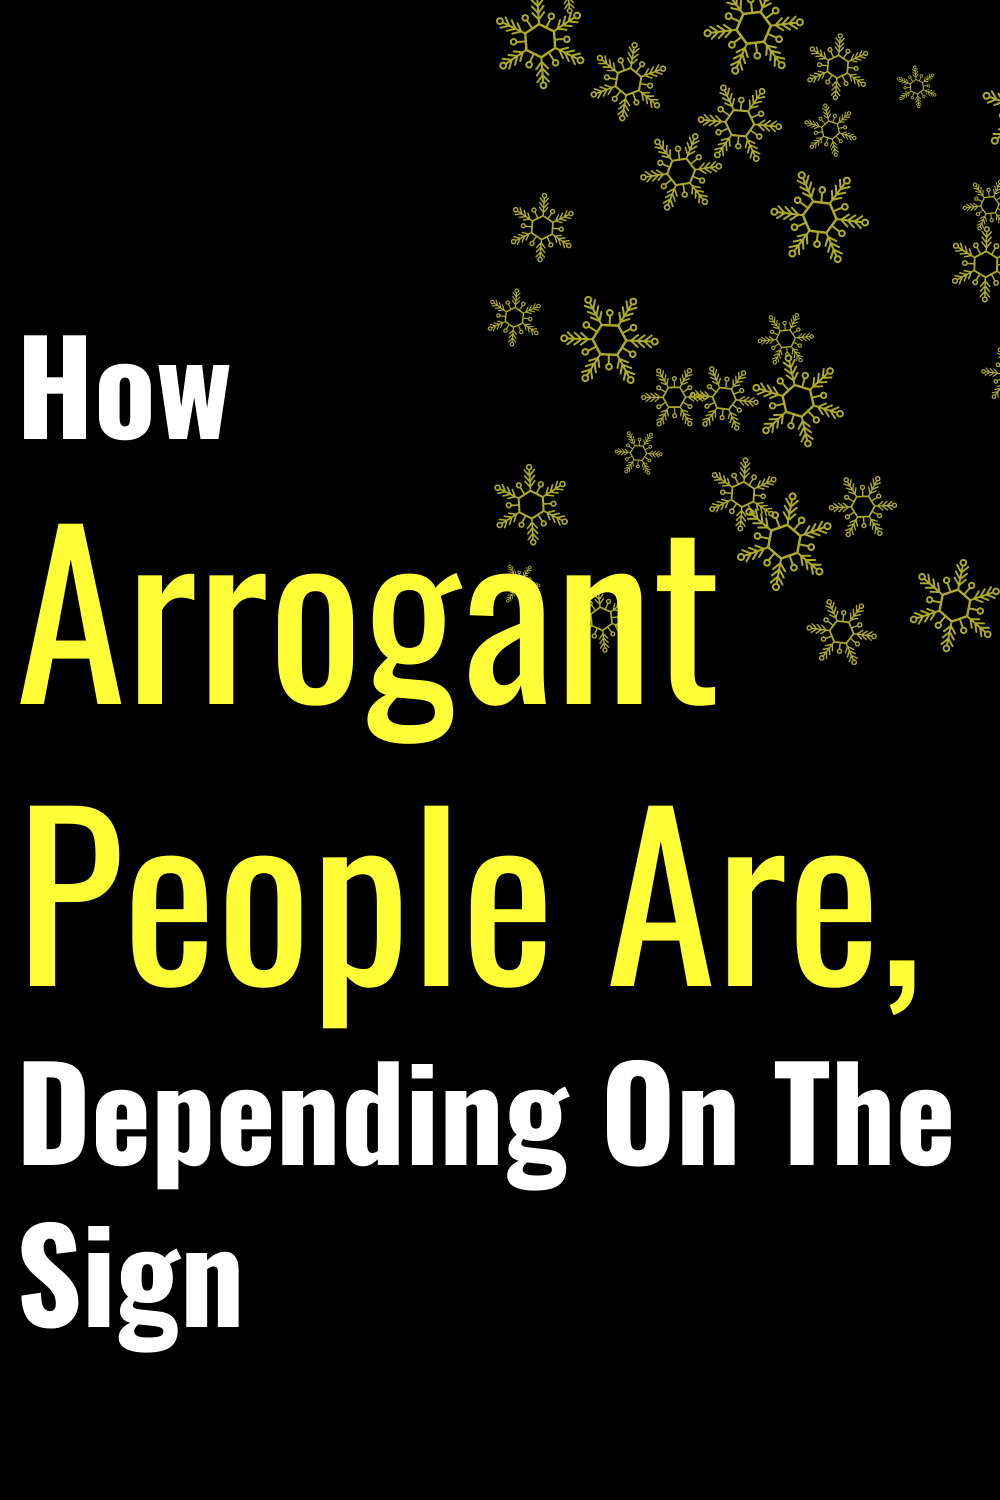 How Arrogant People Are, Depending On The Sign